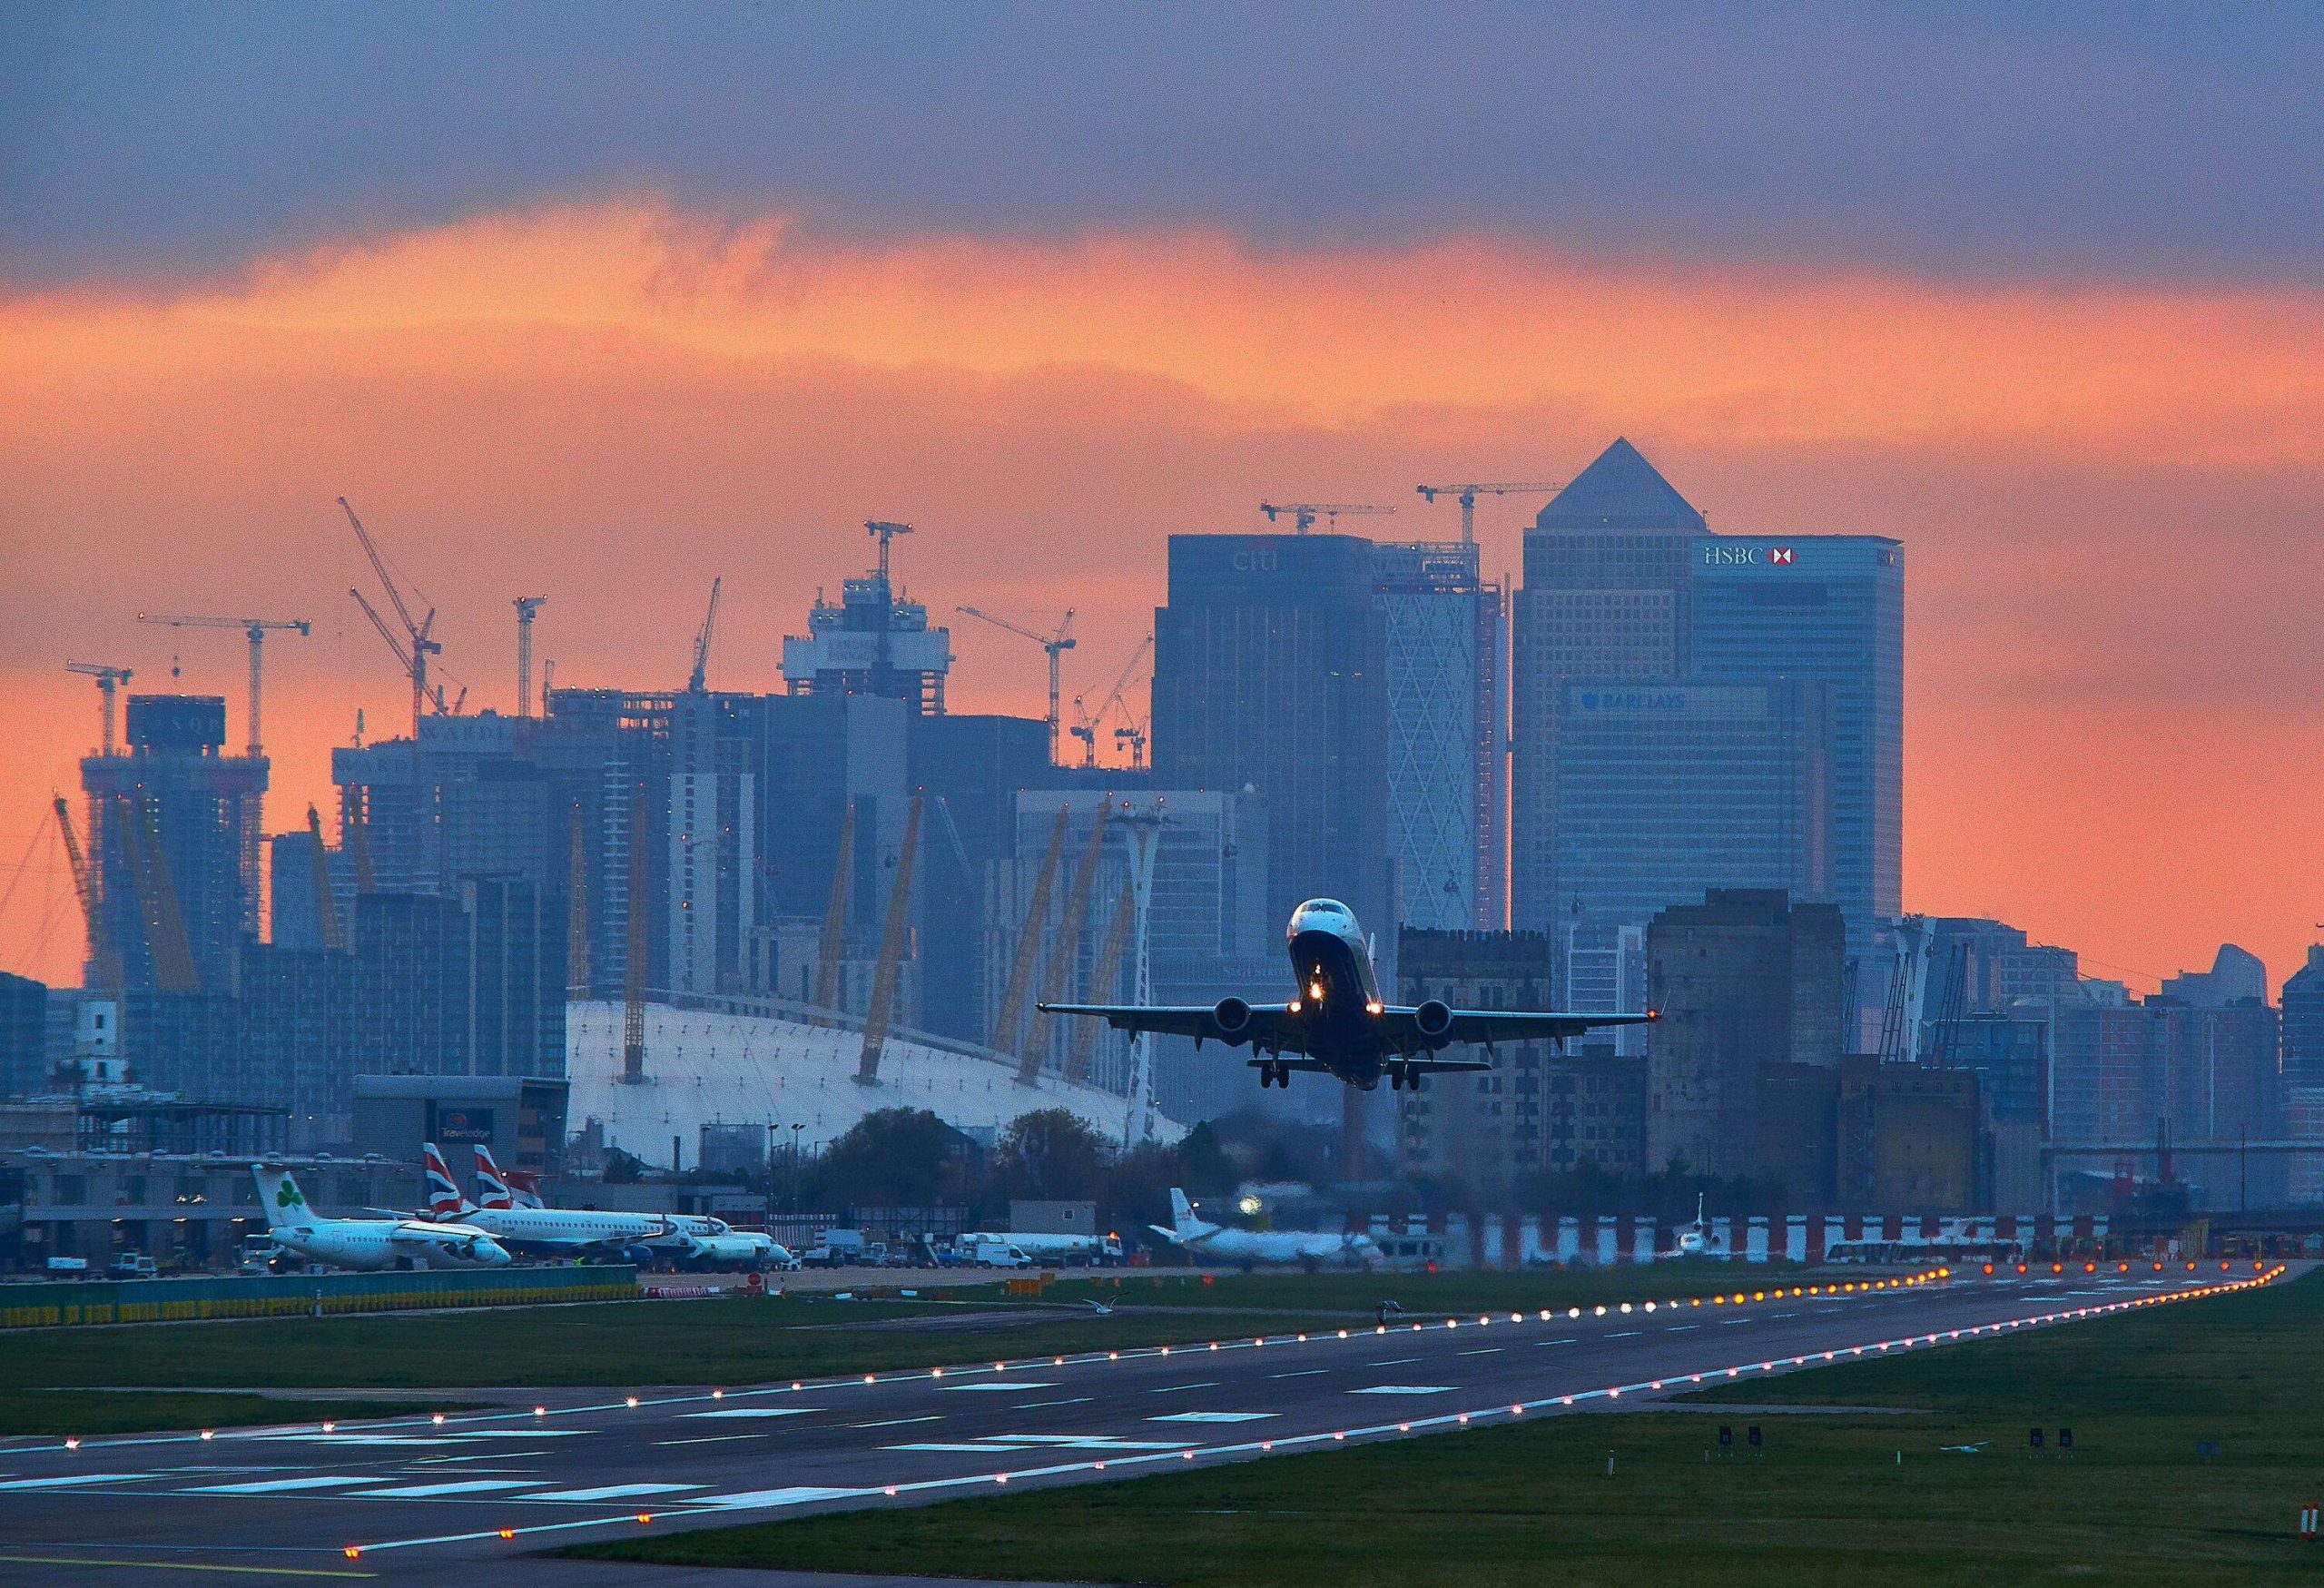 Passenger Aircraft taking off with the buildings of Canary Wharf in the distance.